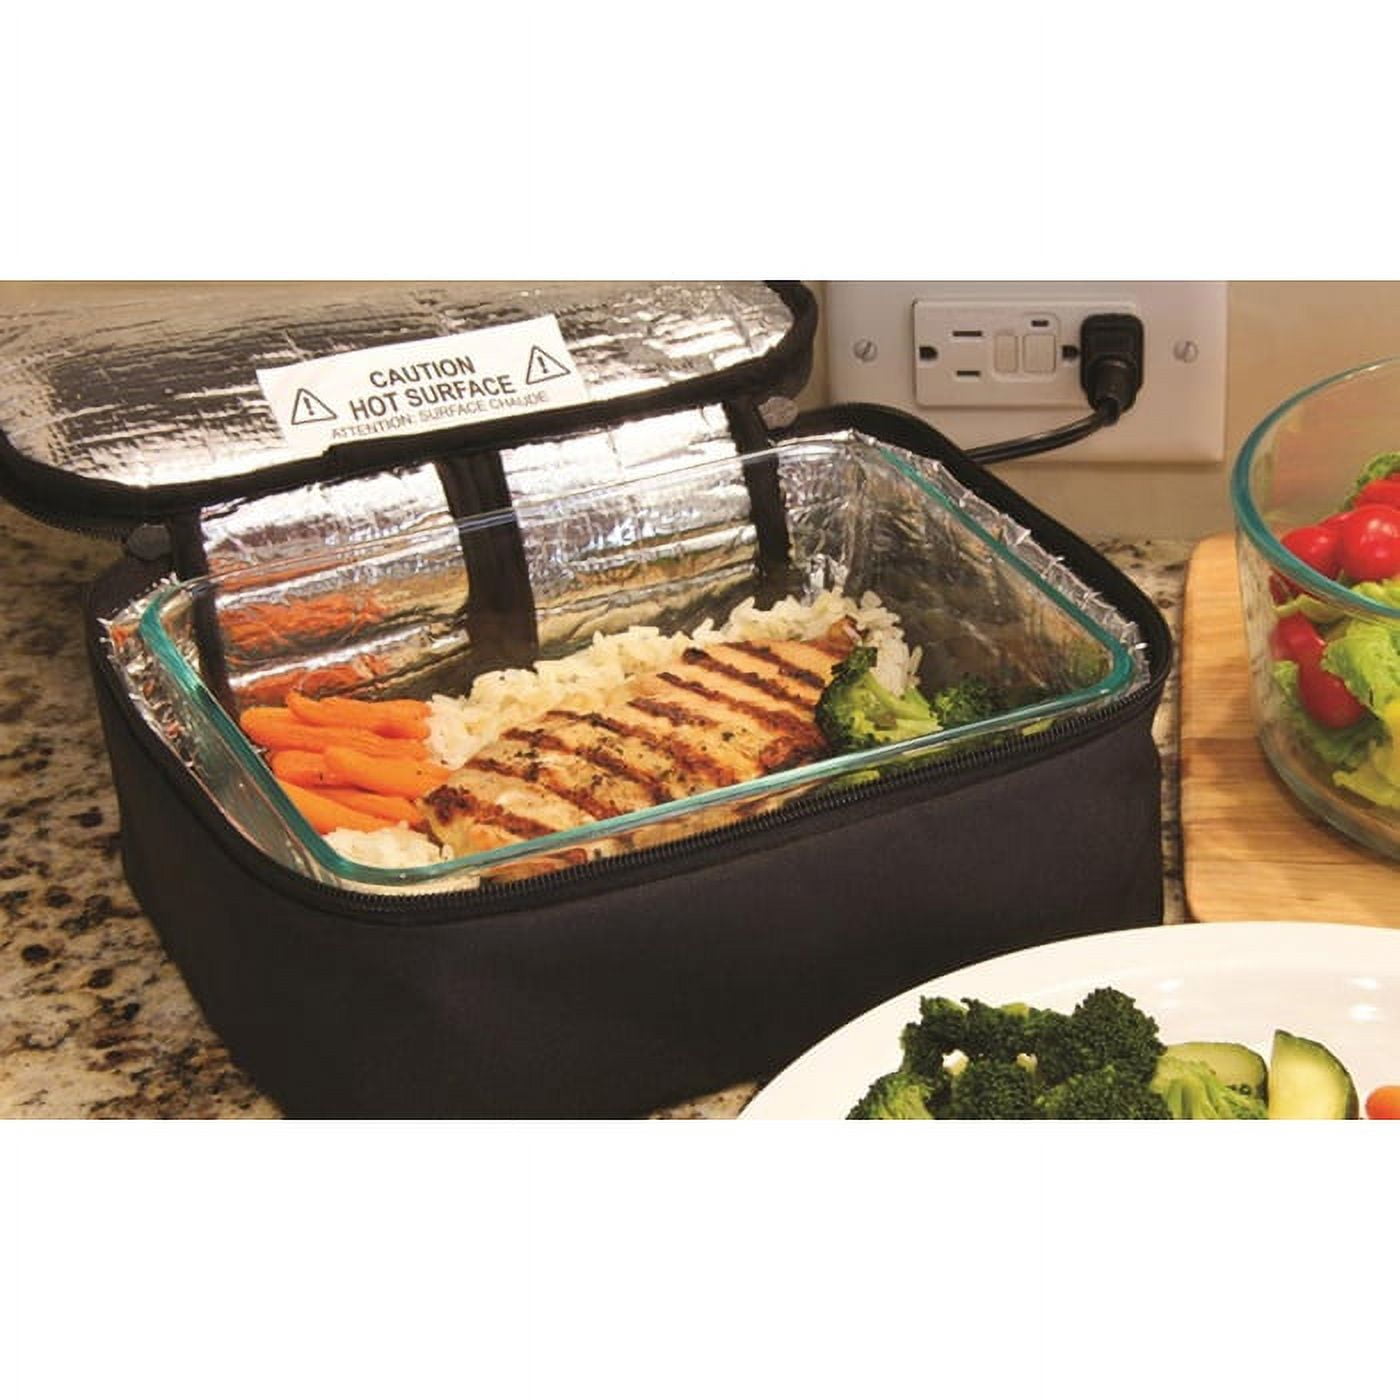 HotLogic Mini Portable Food Warmer for Home, Office, and Travel, Black 